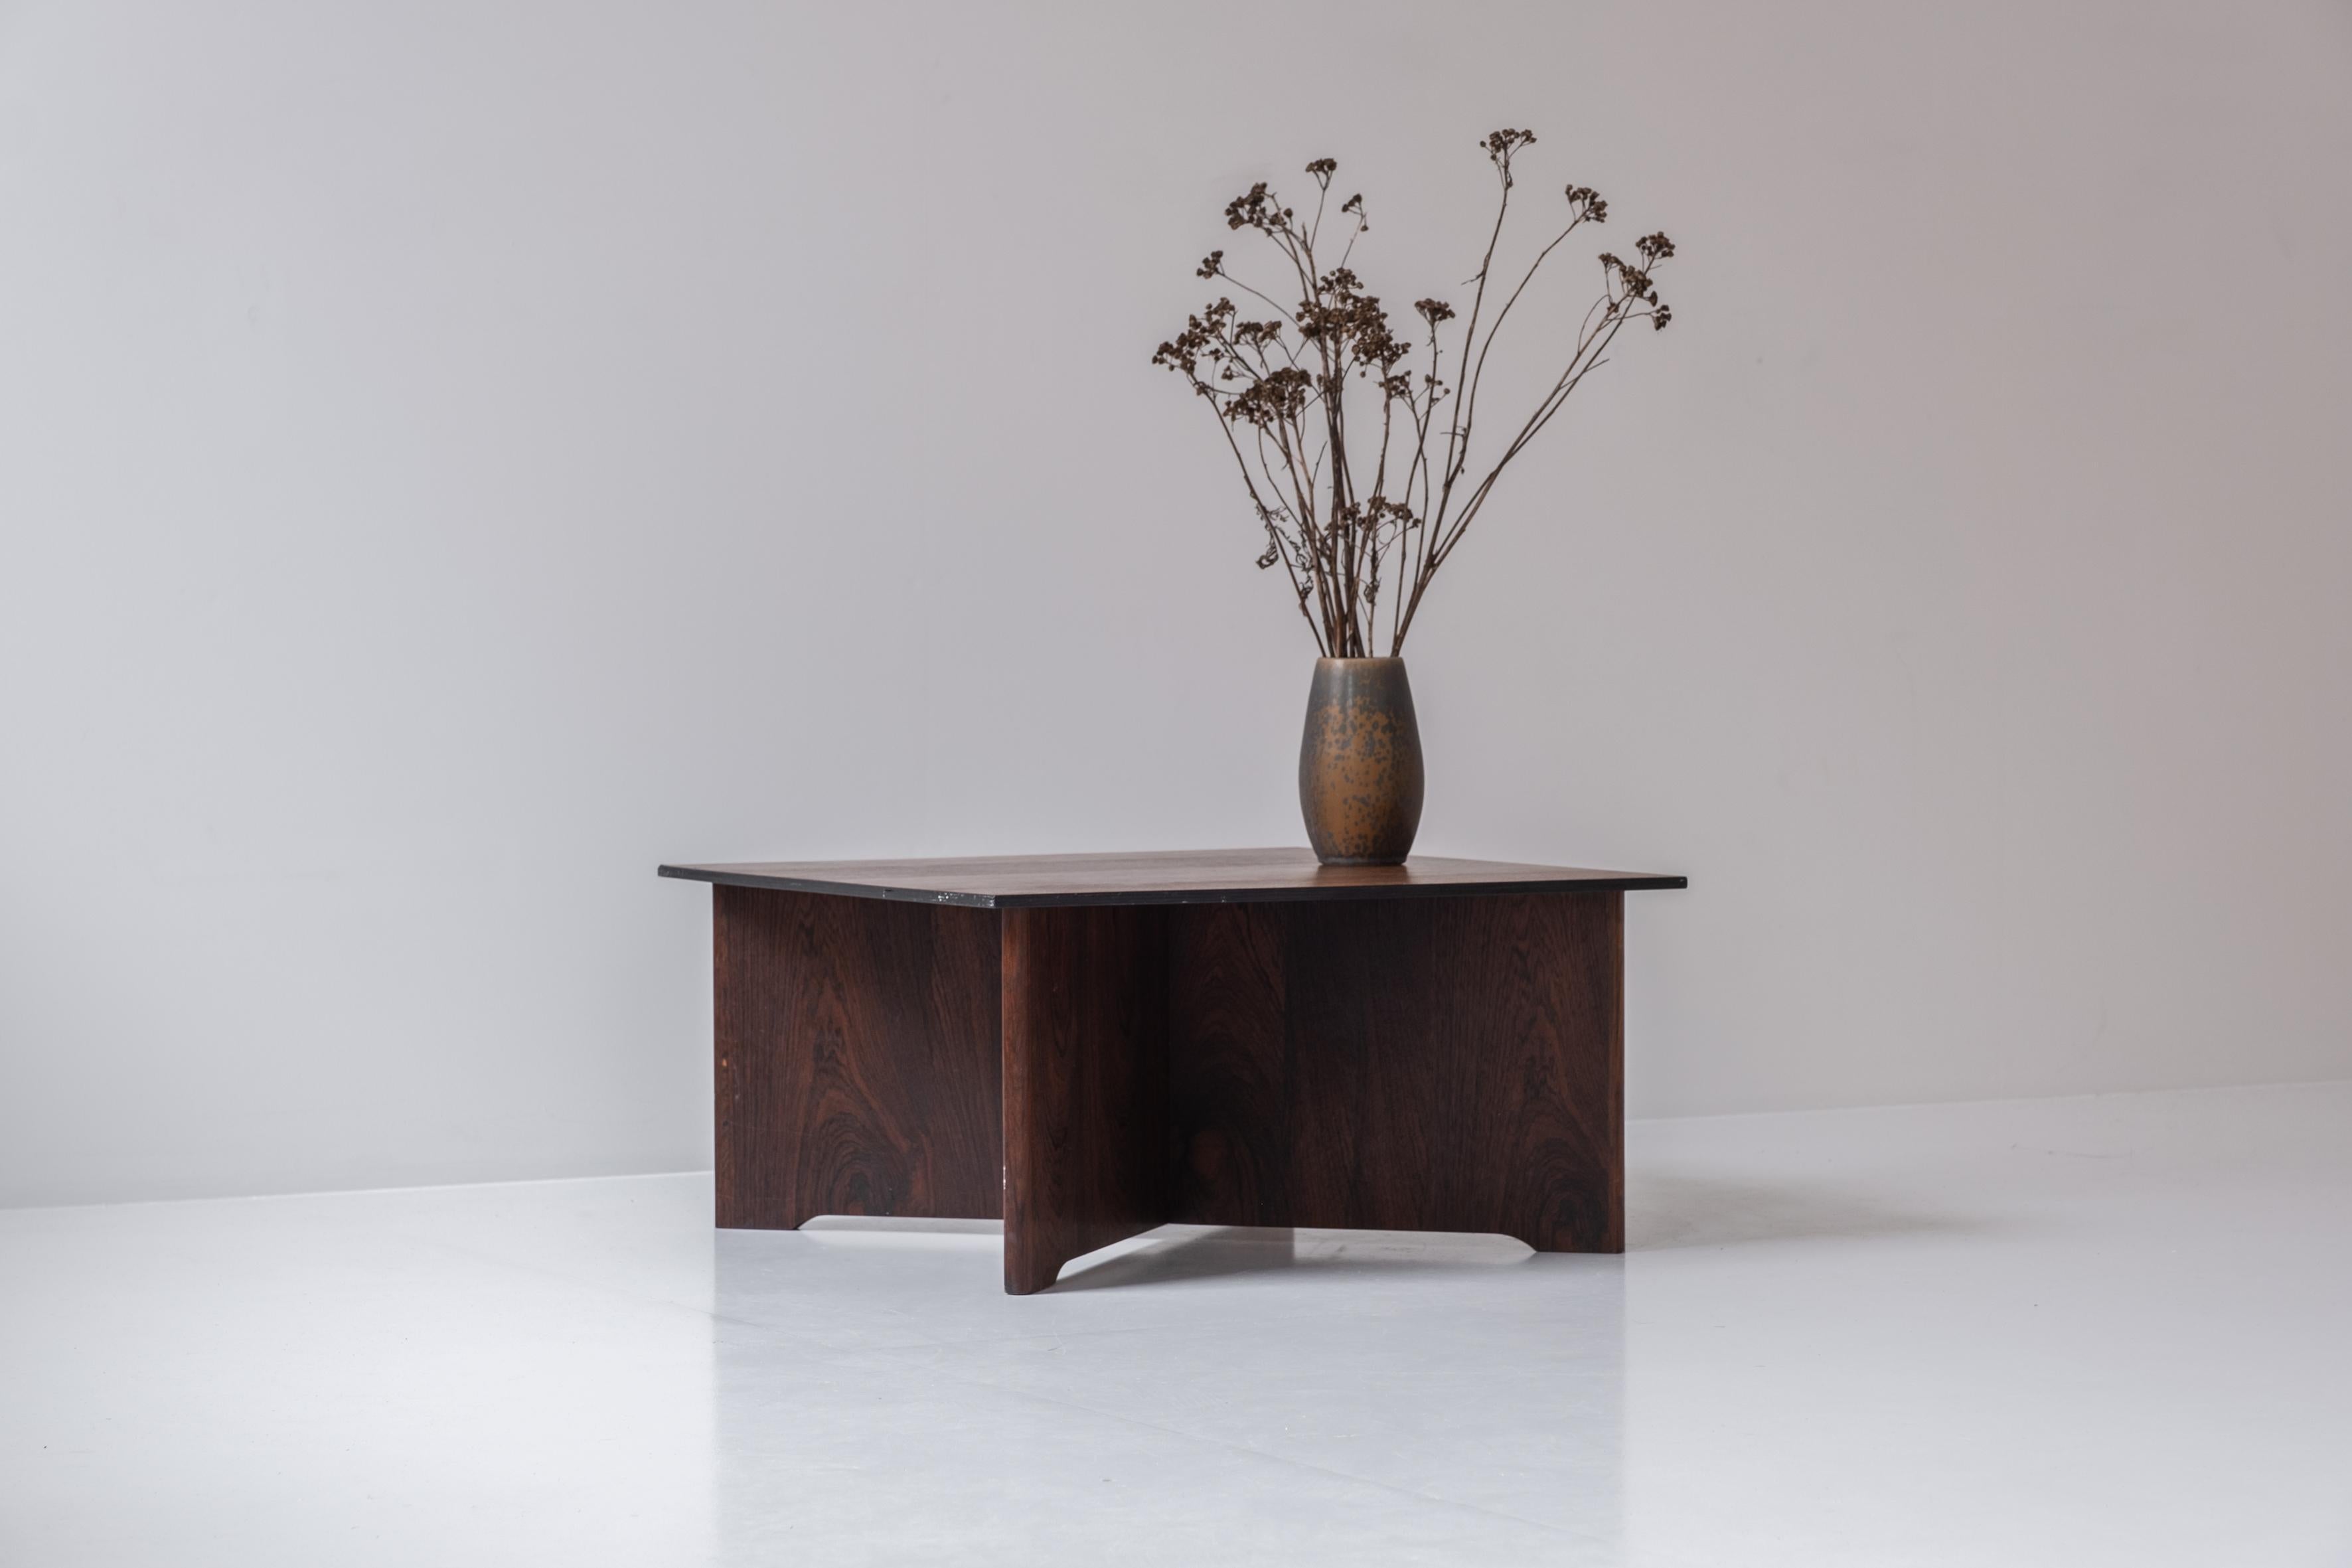 Square coffee table from Denmark, designed in the 1960s. This low coffee table or side table features a base and top of rosewood. Atypical size. Gorgeous grain.